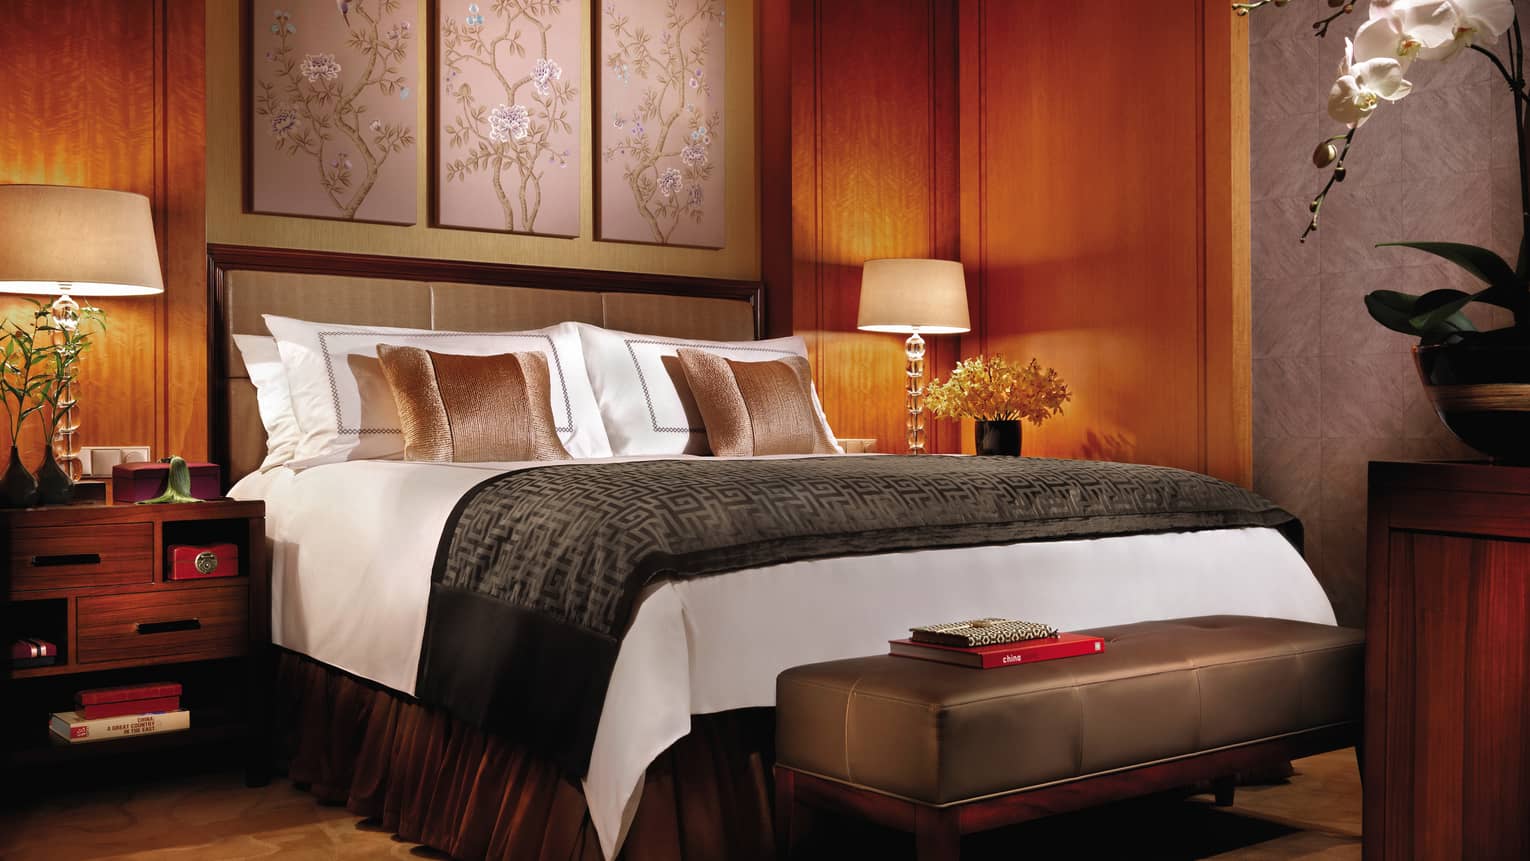 Deluxe Room hotel bed with dark brown, wood decor, traditional Chinese art